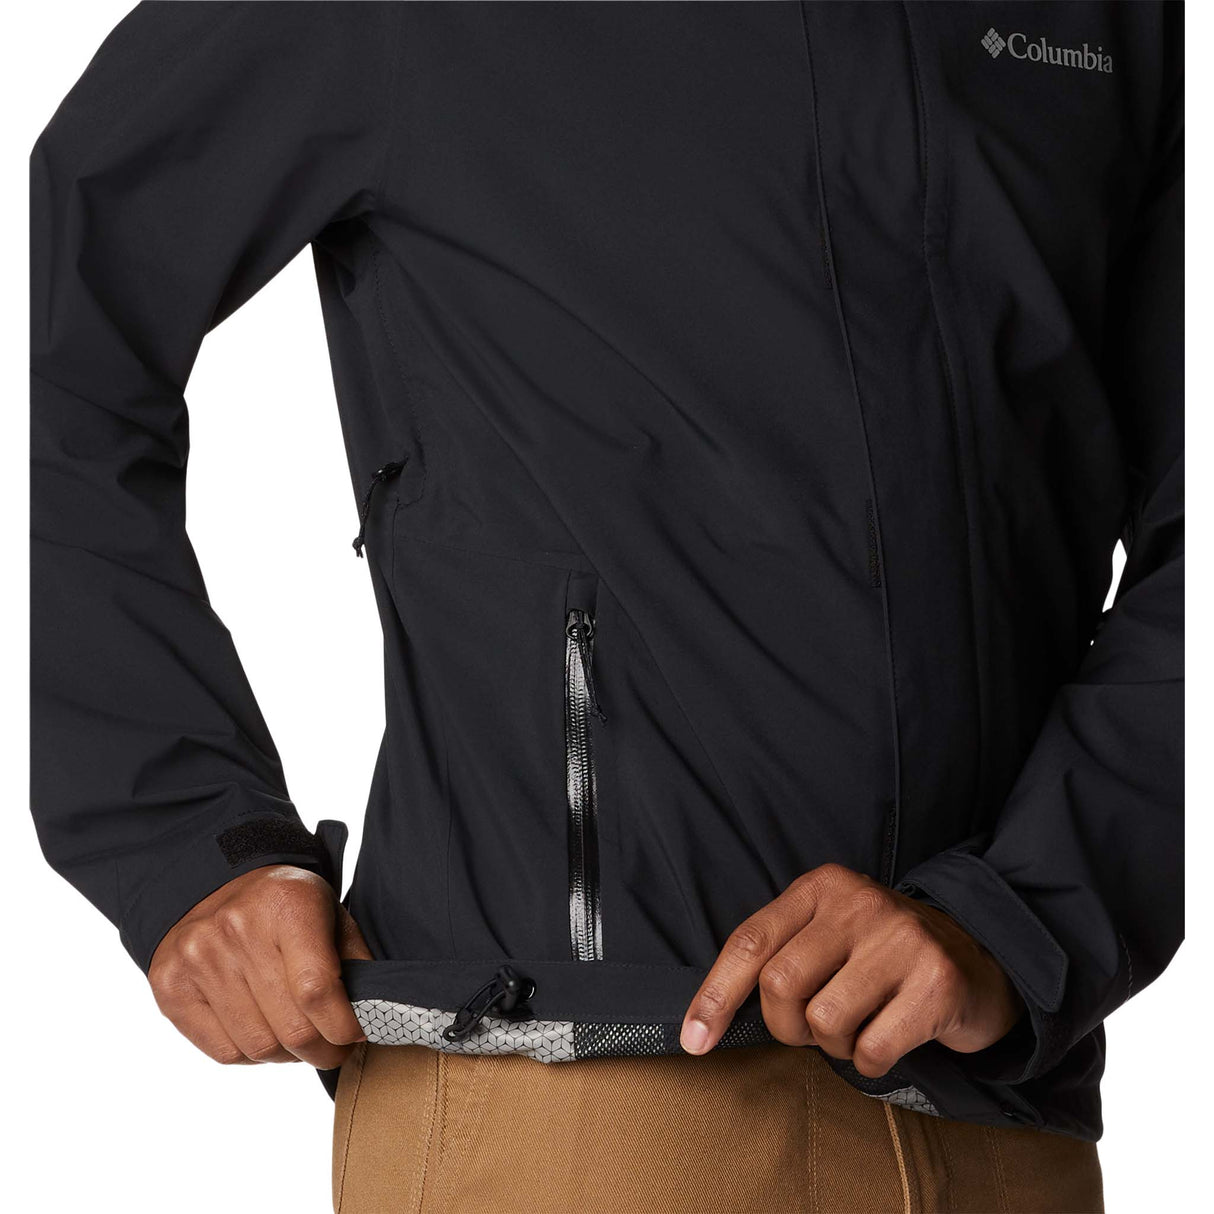 Columbia Earth Explorer manteau coquille noir homme taille